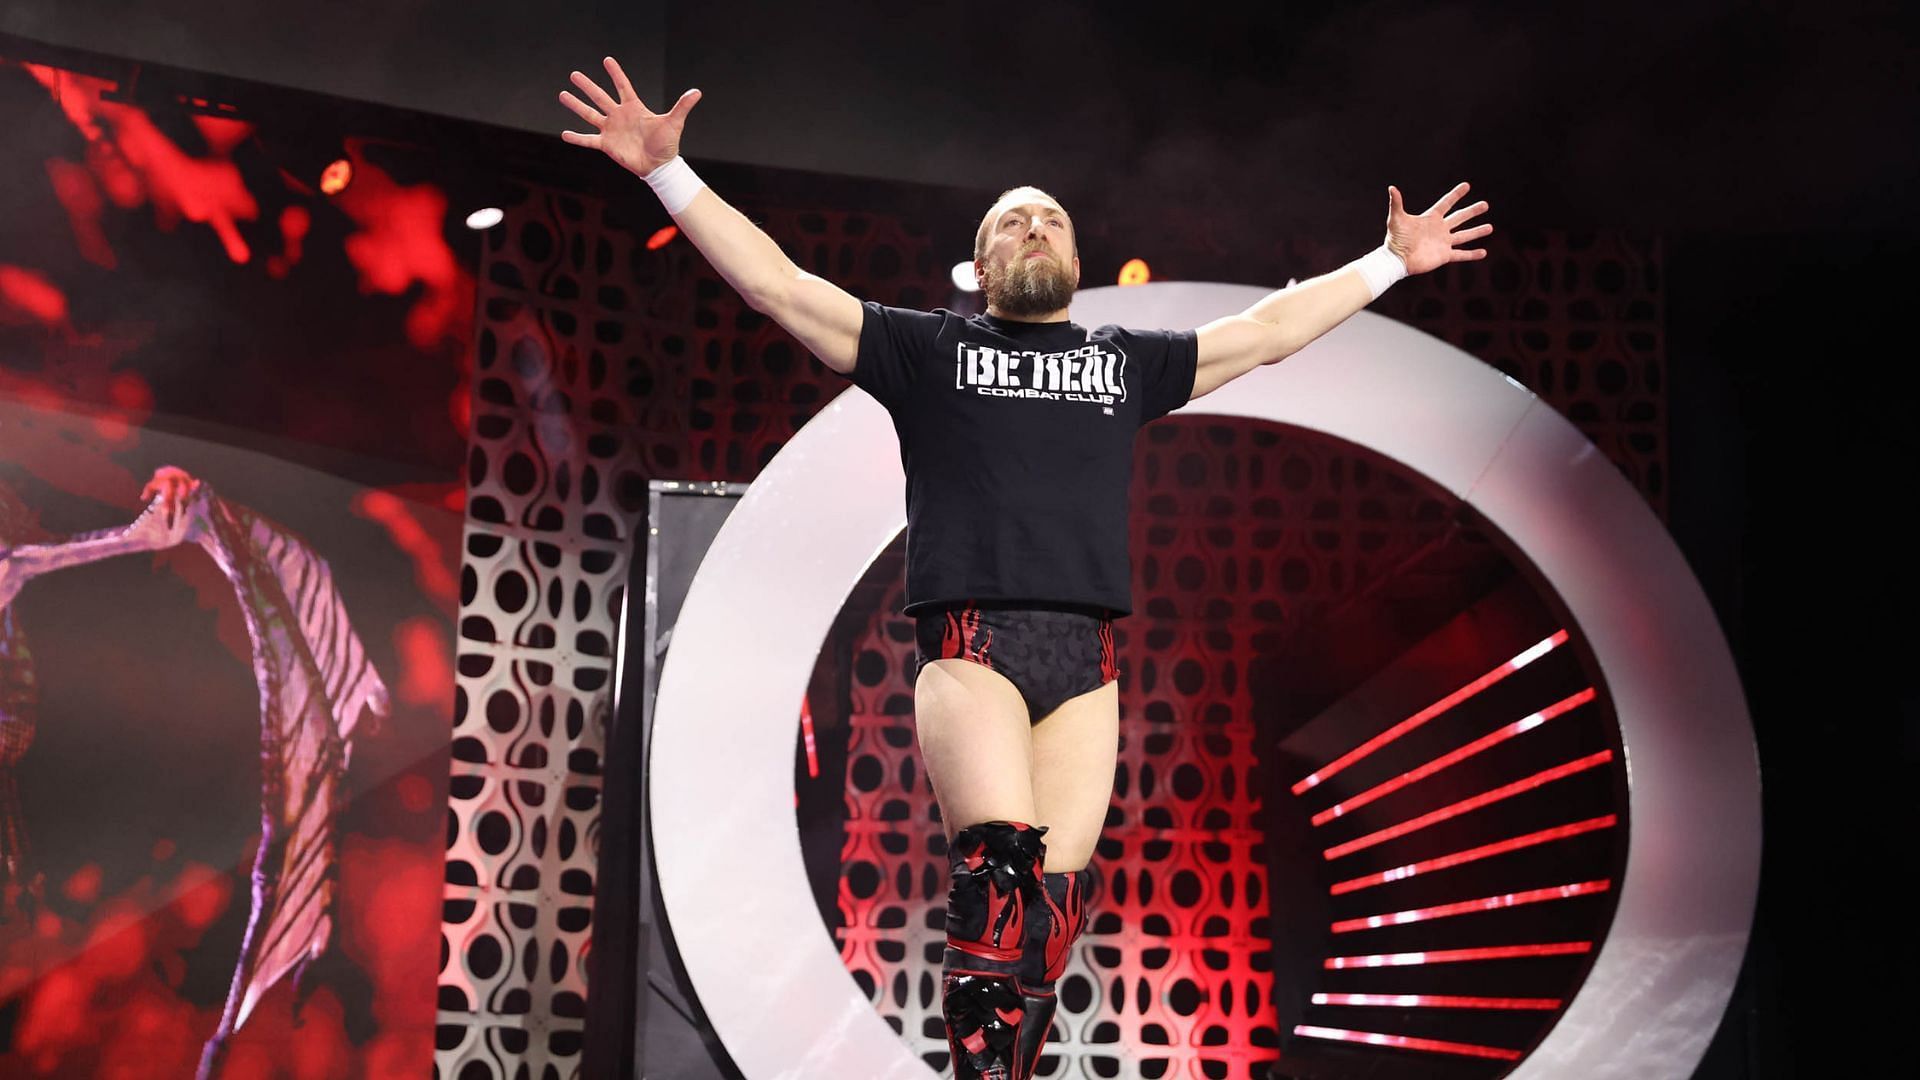 Bryan Danielson is a WWE Grand Slam Champion who is now with AEW [Photo courtesy of AEW